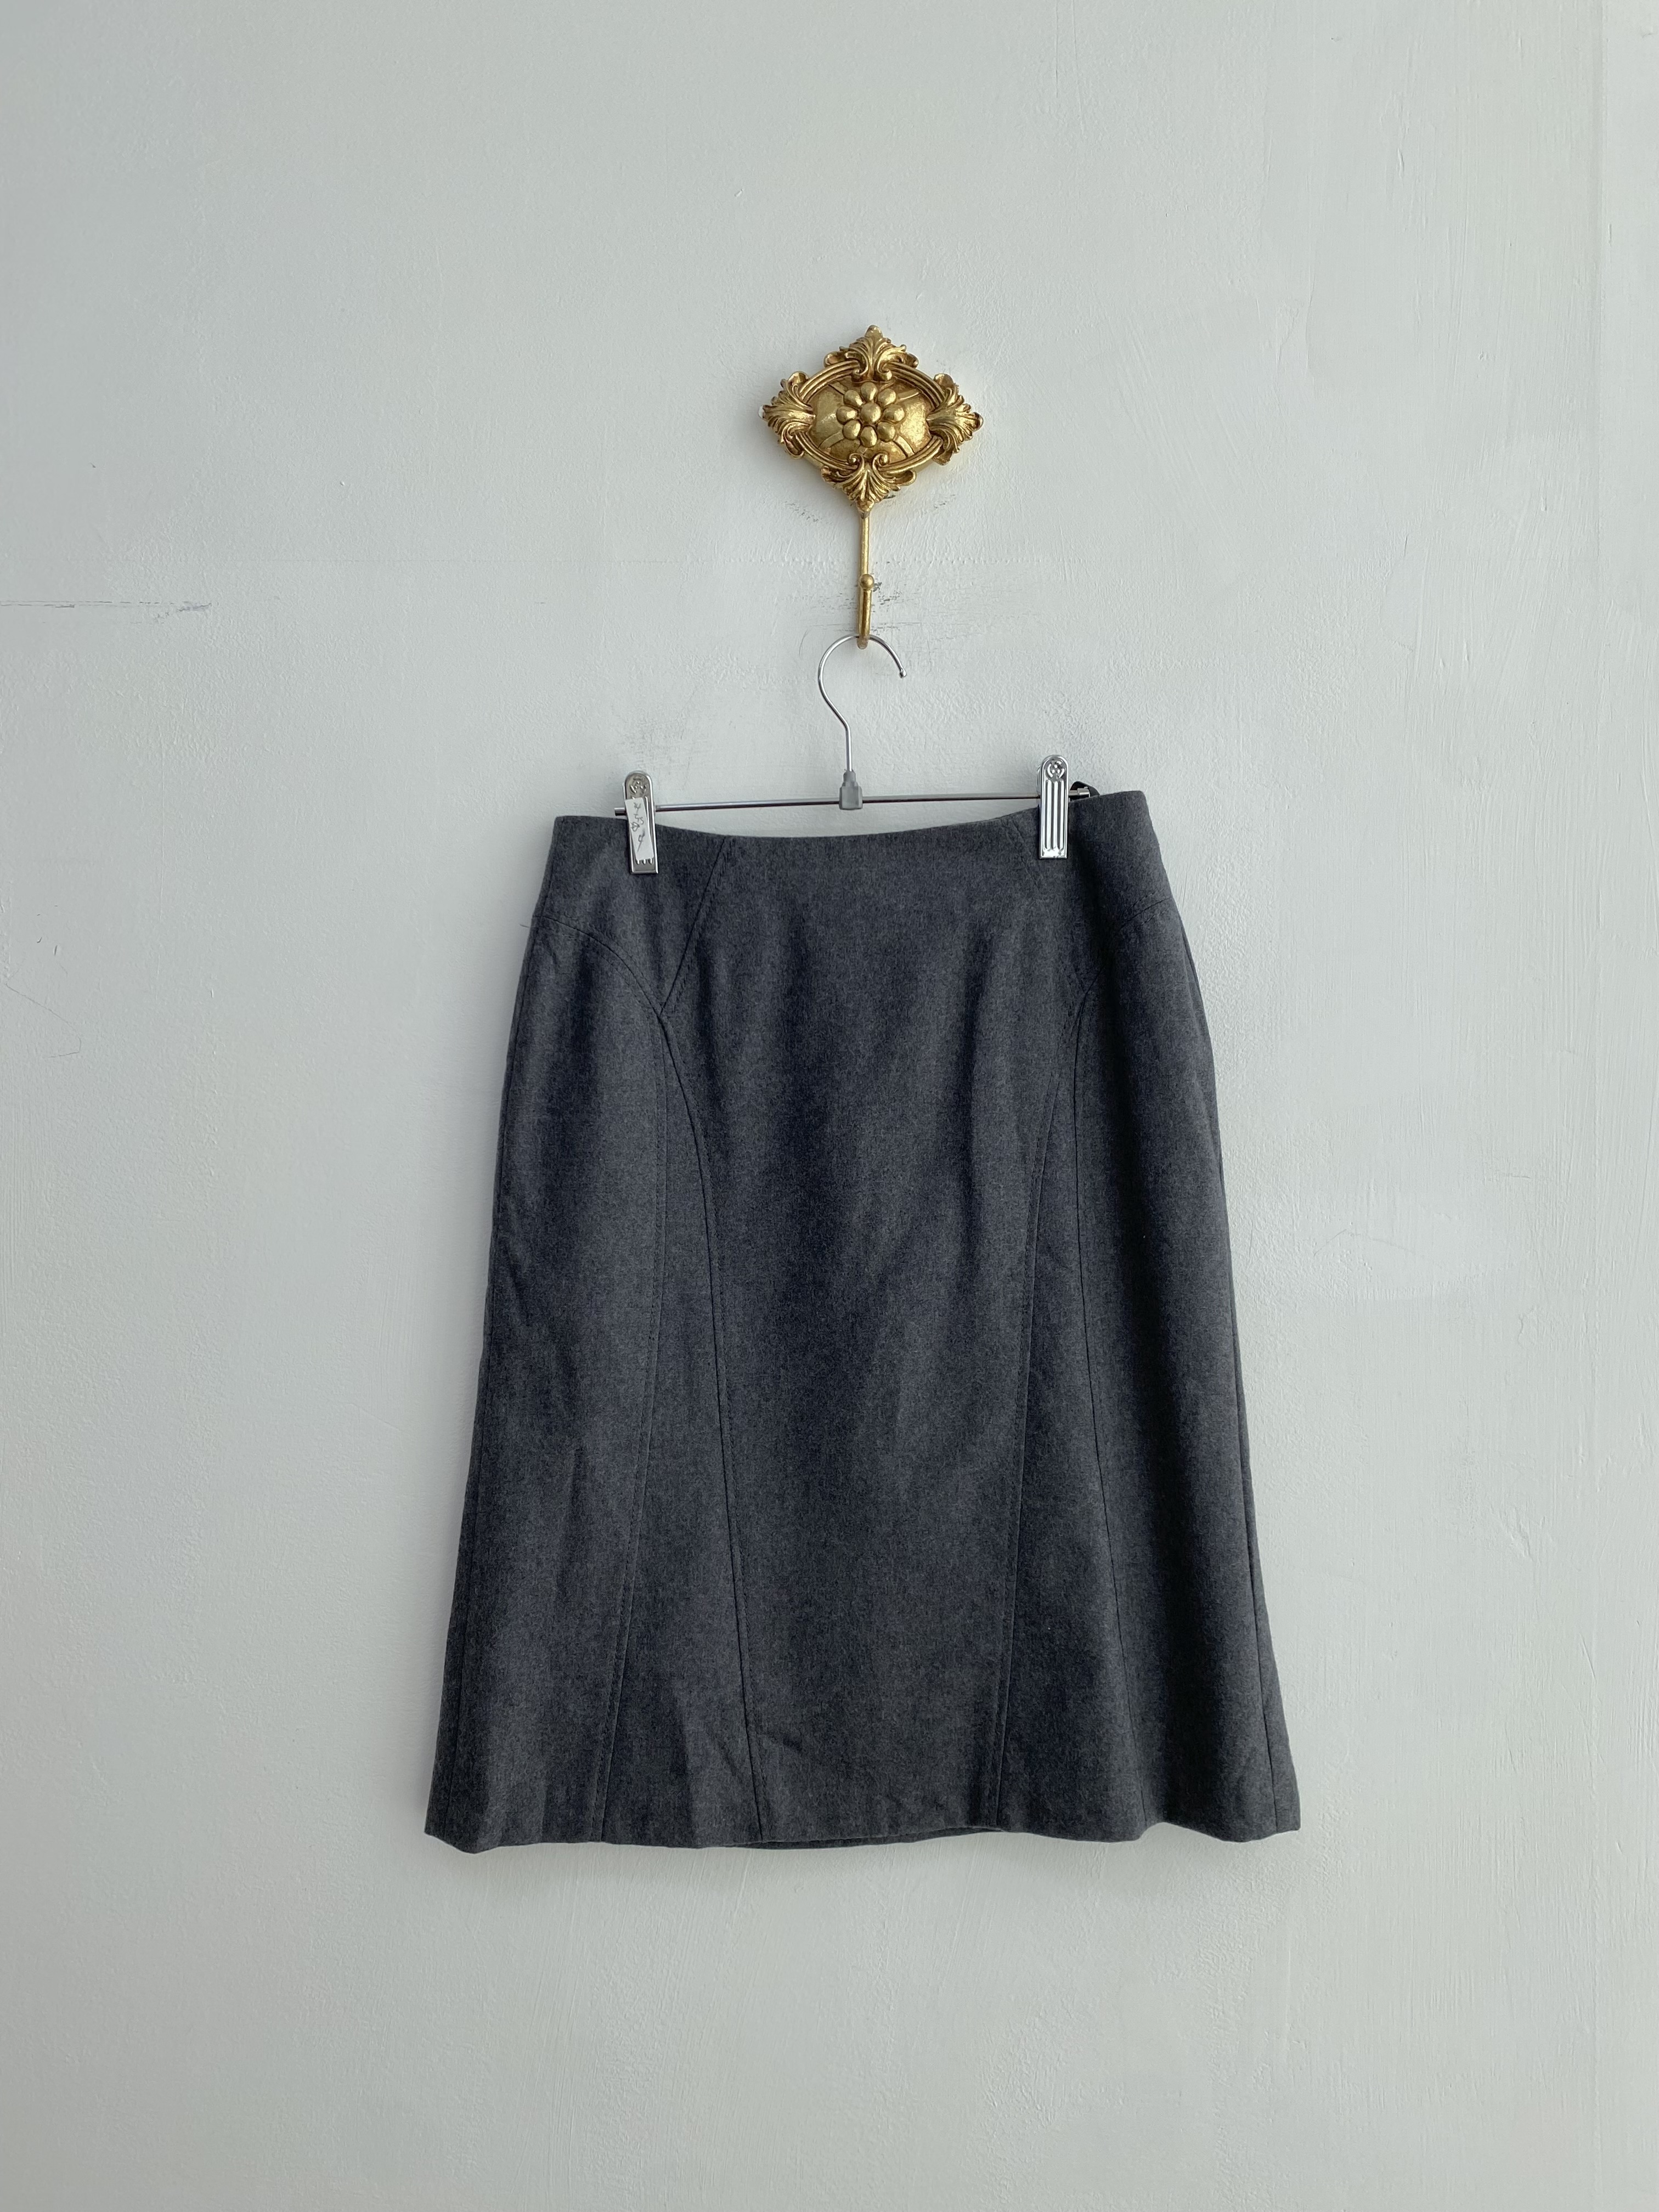 Coup De Chance grey wool simple mid skirt